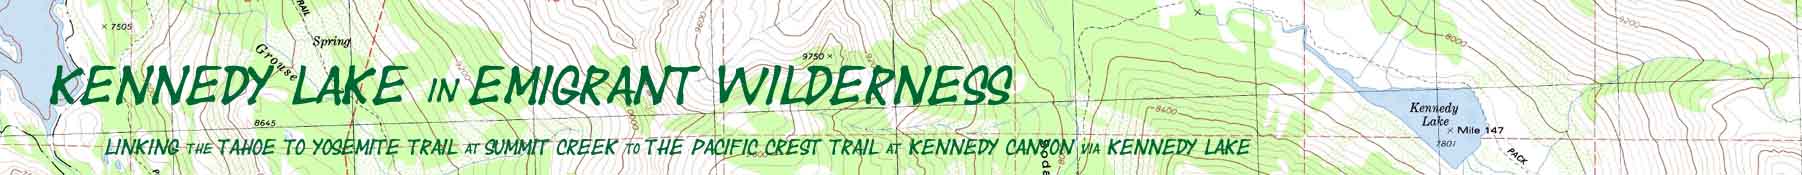 Topo Hiking Map: Tahoe to Yosemite Trail to Pacific Crest Trail via Kennedy Lake, Emigrant Wilderness.